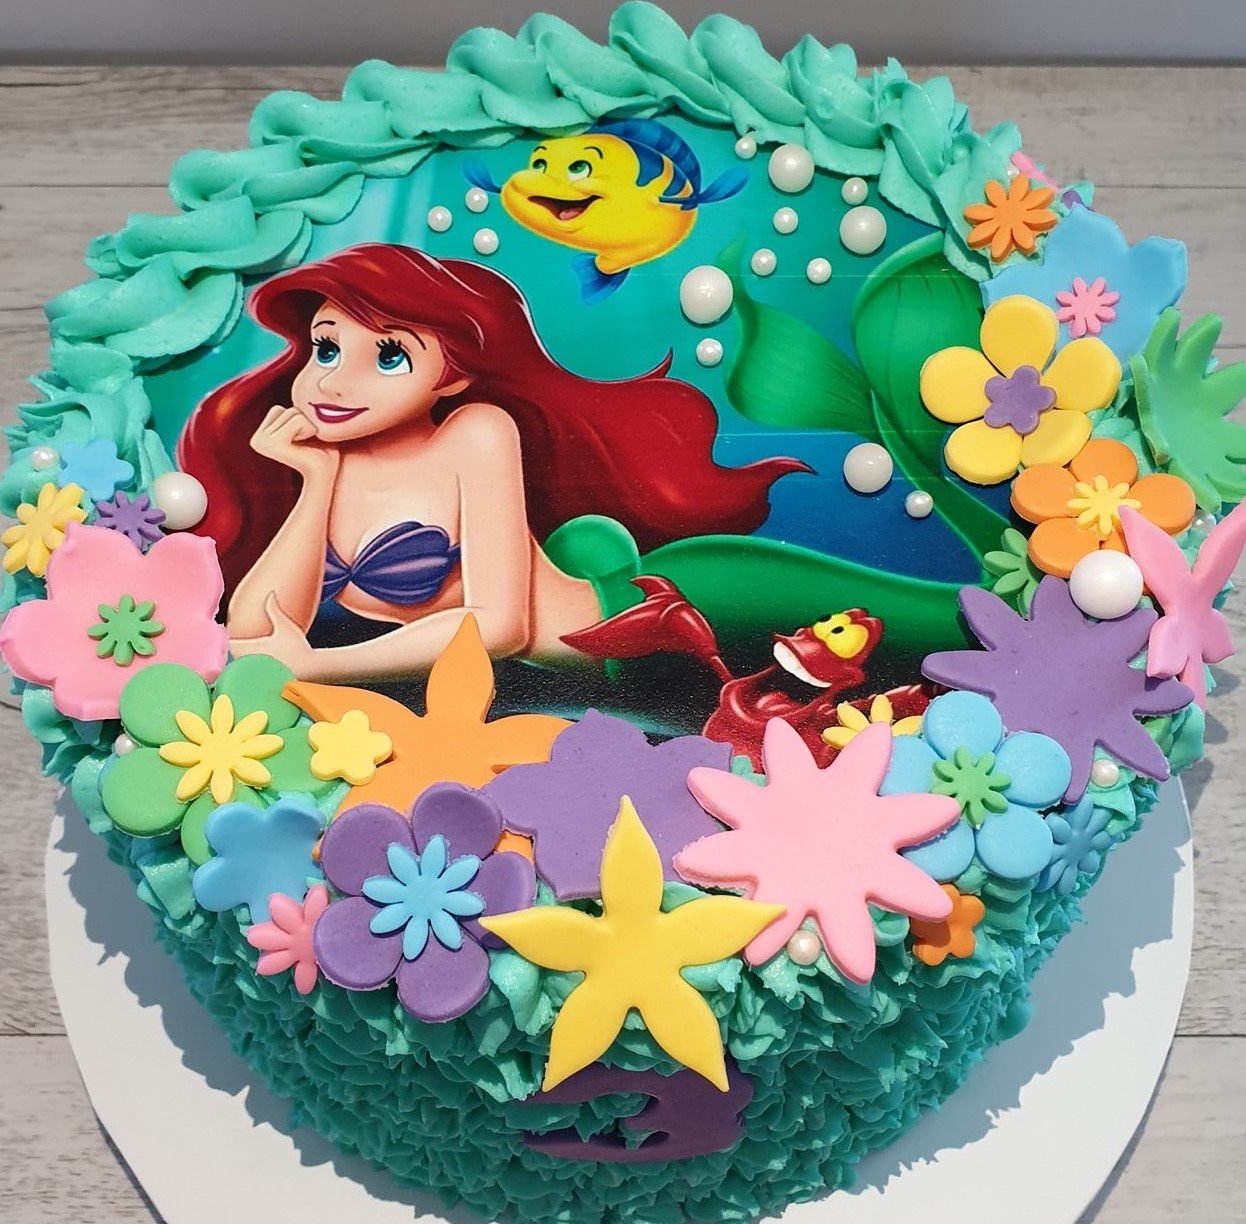 2 Layer Strawberry and Vanilla Little Mermaid Birthday Cake With Buttercream Frosting, Fondant, and Edible Image